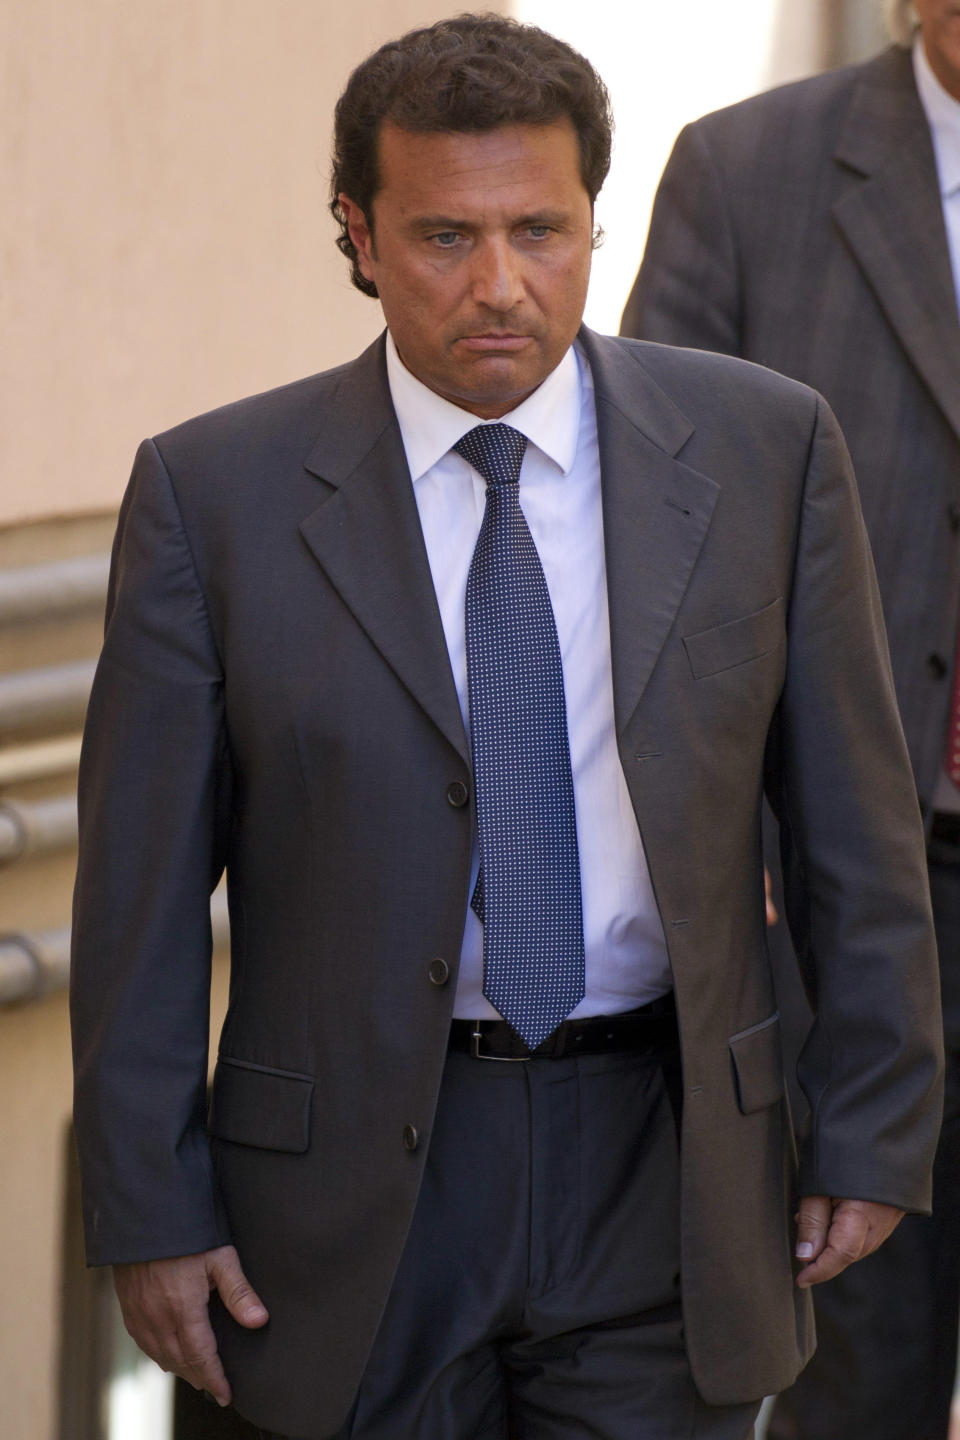 FILE -- In this file photo taken in Grosseto on April 15 2013, former captain of the Costa Concordia luxury cruise ship Francesco Schettino leaves after a closed-door hearing. The Italian captain of the Costa Concordia cruise ship was ordered on Wednesday to stand trial for manslaughter in the luxury liner's shipwreck off the coast of Tuscany, which killed 32 people. Judge Pietro Molino, at a closed door hearing in the town of Grosseto, agreed to prosecutors' requests that Francesco Schettino should be tried on charges of manslaughter, causing the shipwreck and abandoning the vessel while many of the 4,200 passengers and crew were still aboard. (AP Photo/Andrew Medichini)